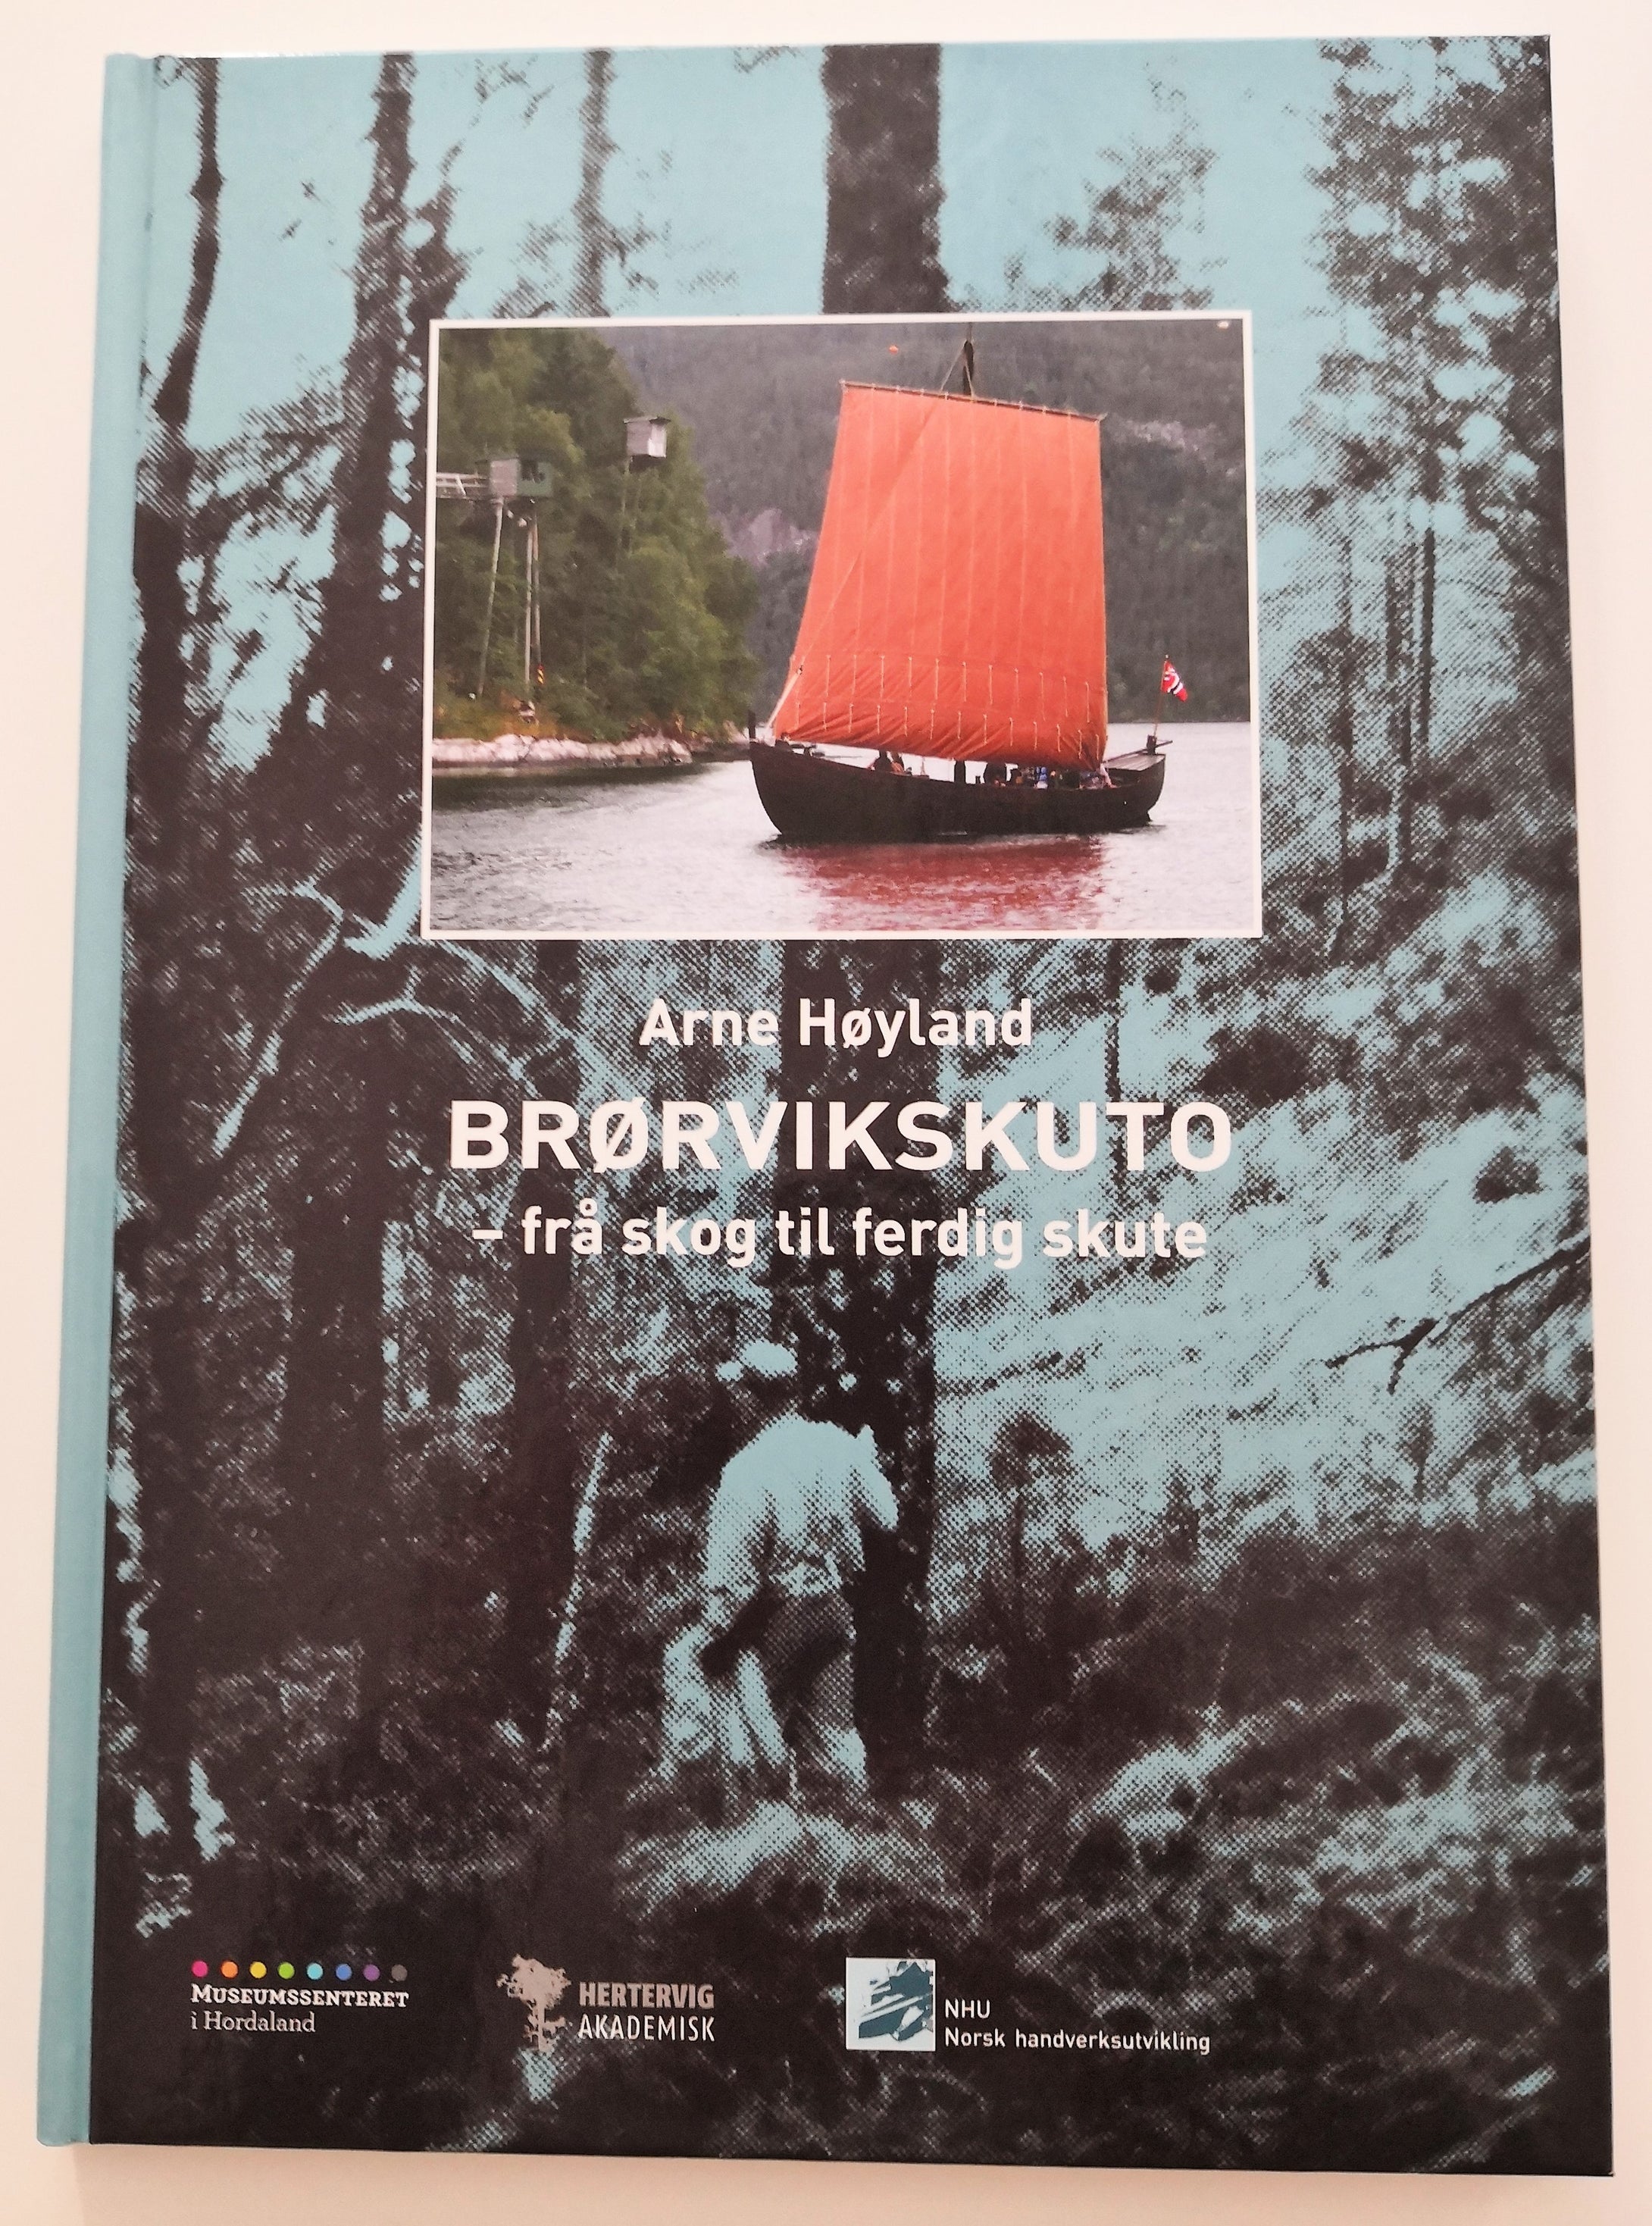 Brørvikskuto - from forest to finished ship